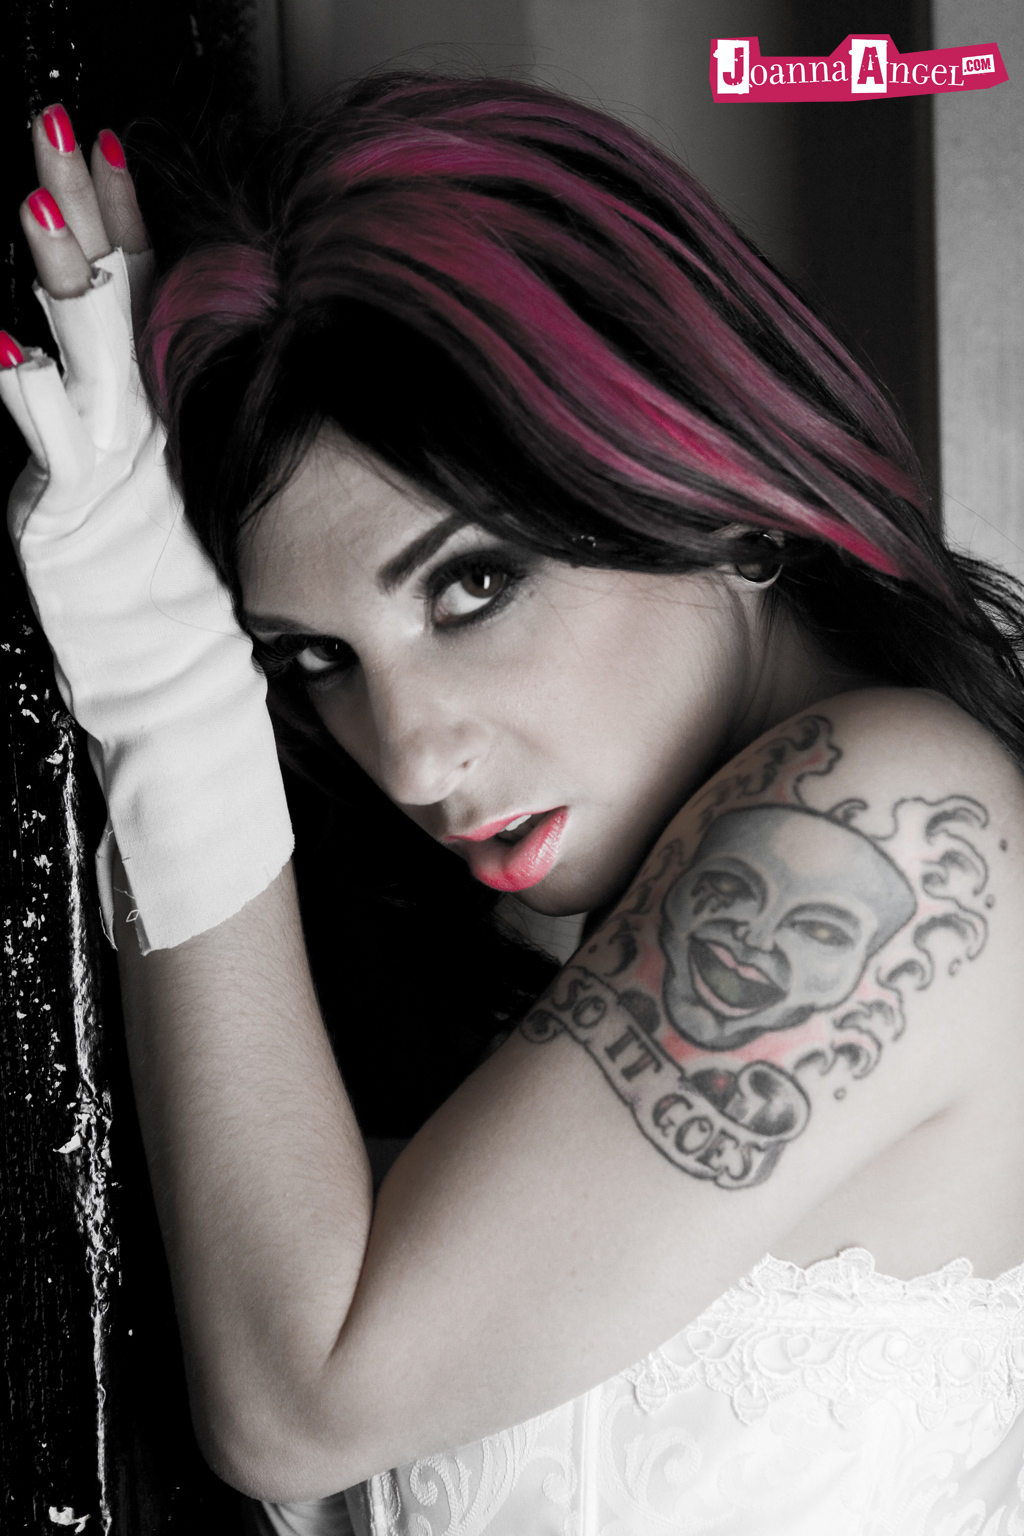 Joanna Angel picture sample number 2